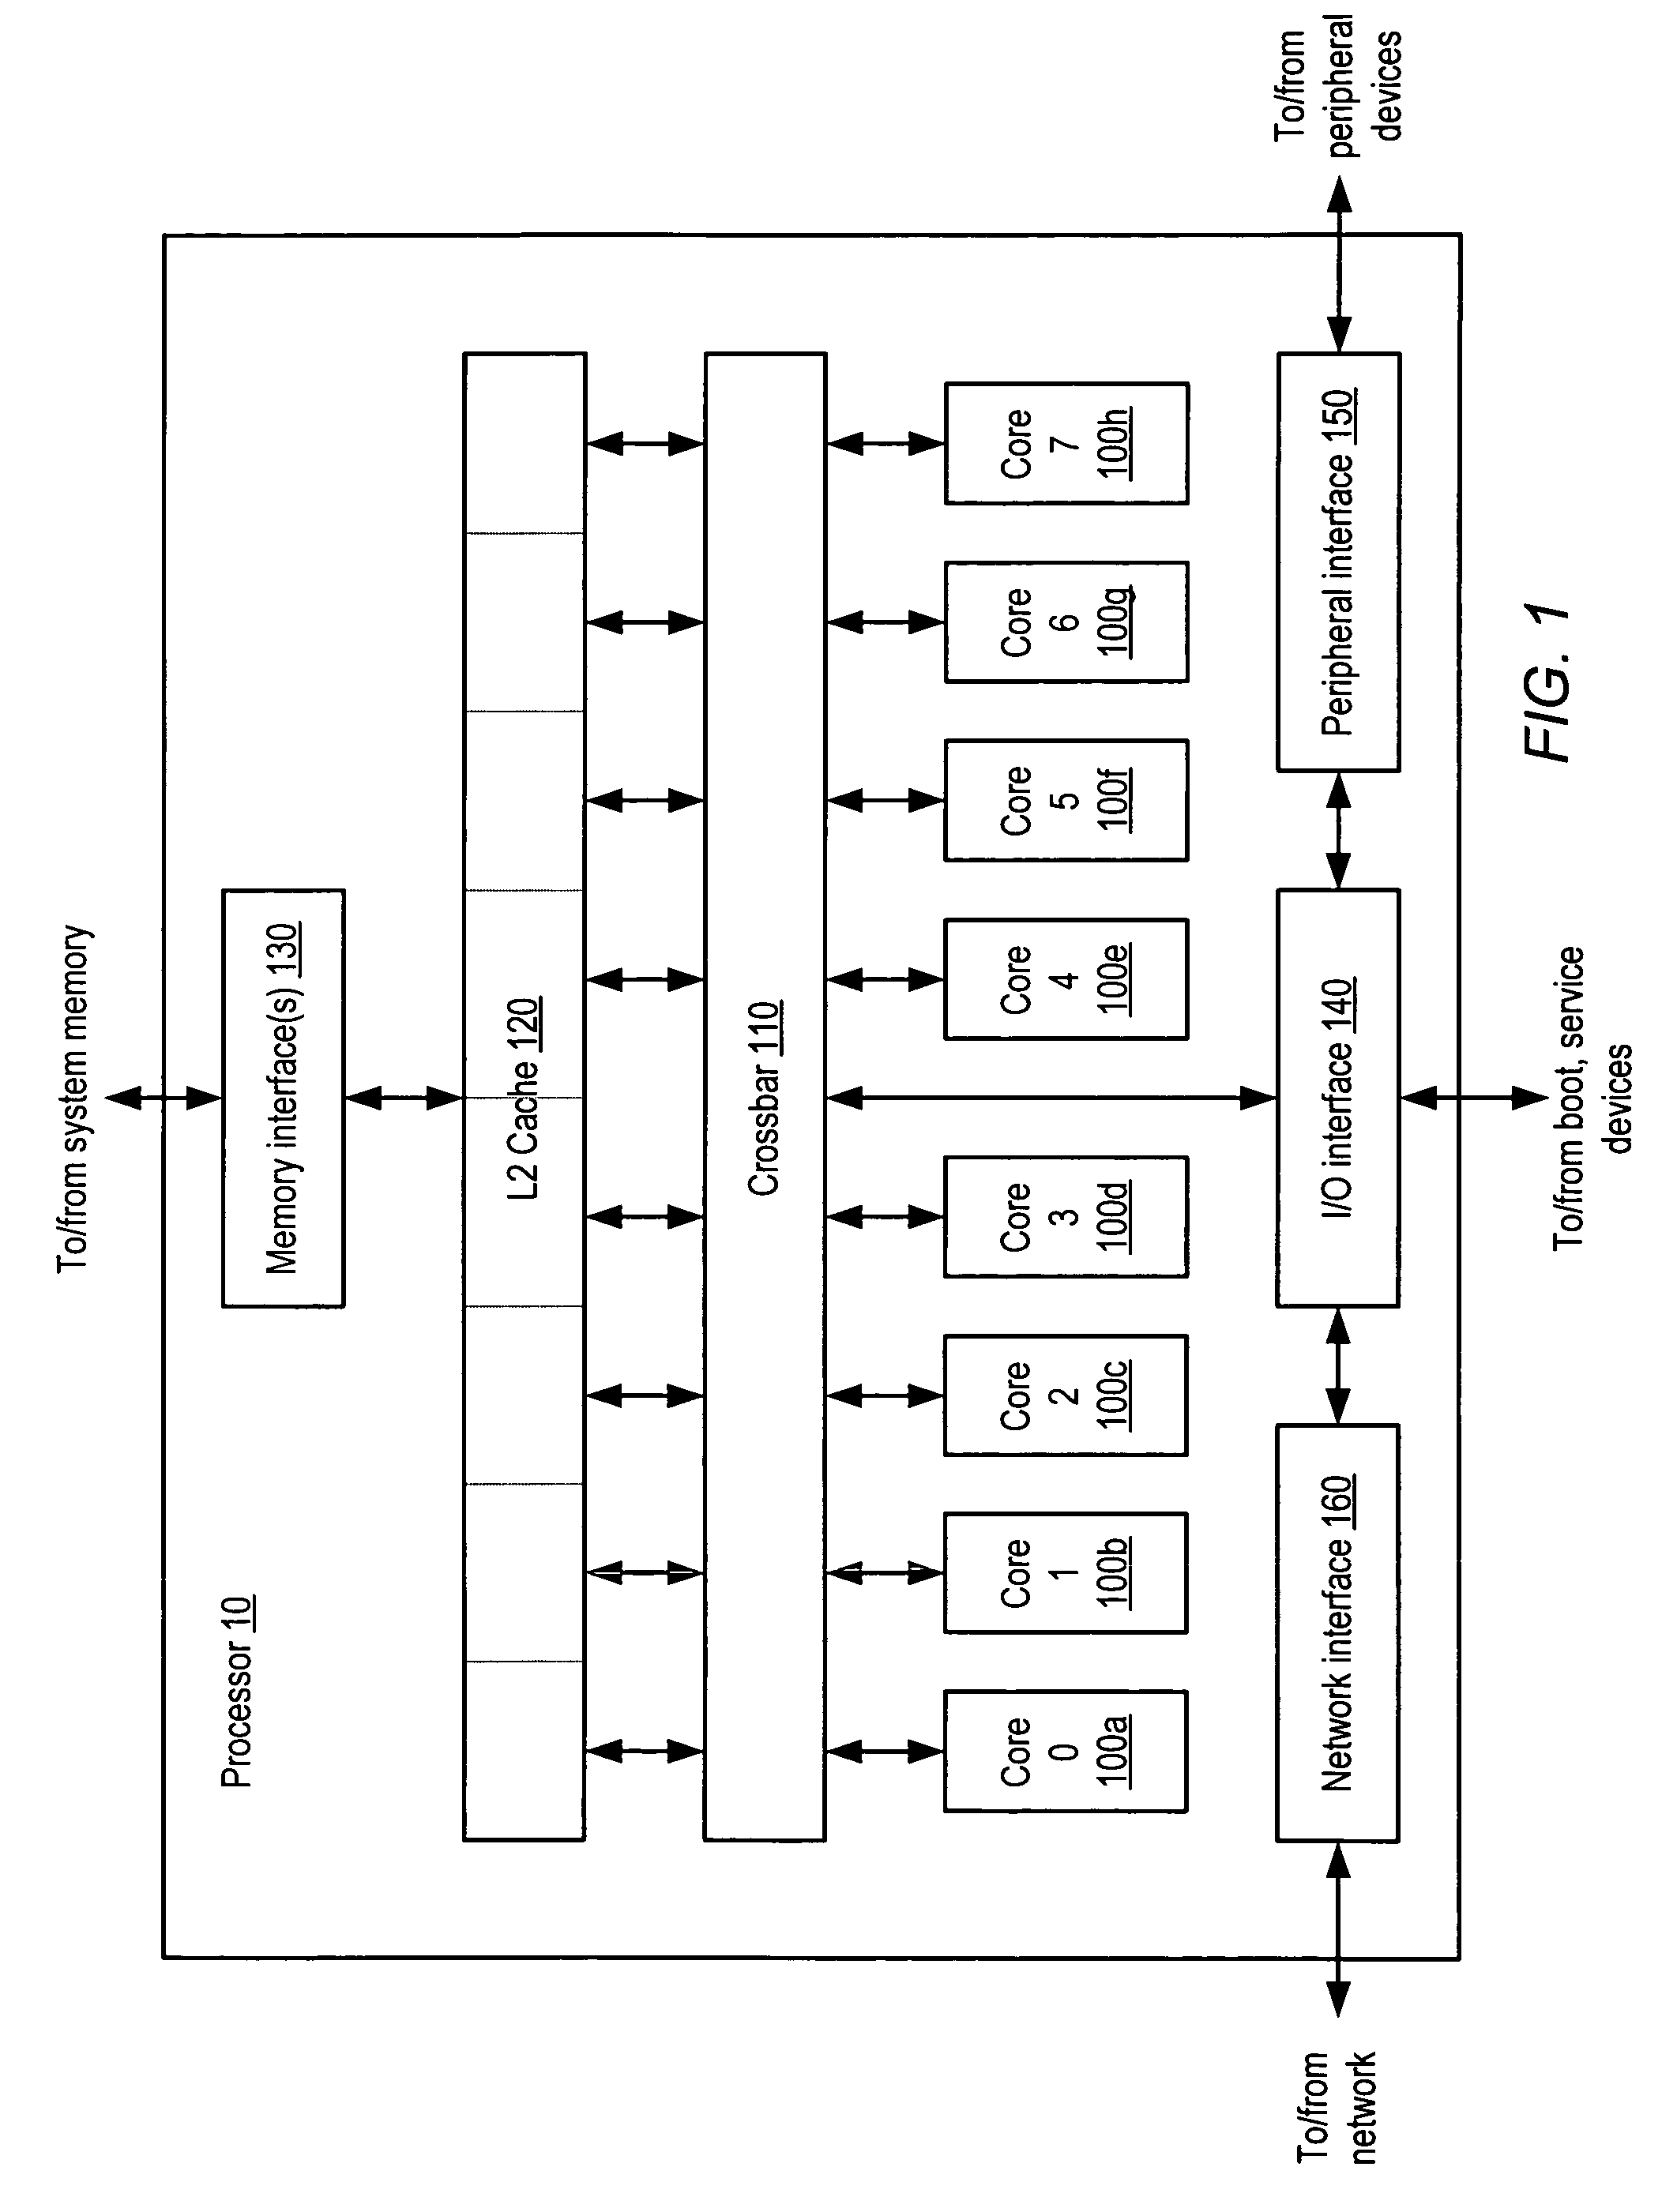 Apparatus and method for reducing execution latency of floating point operations having special case operands